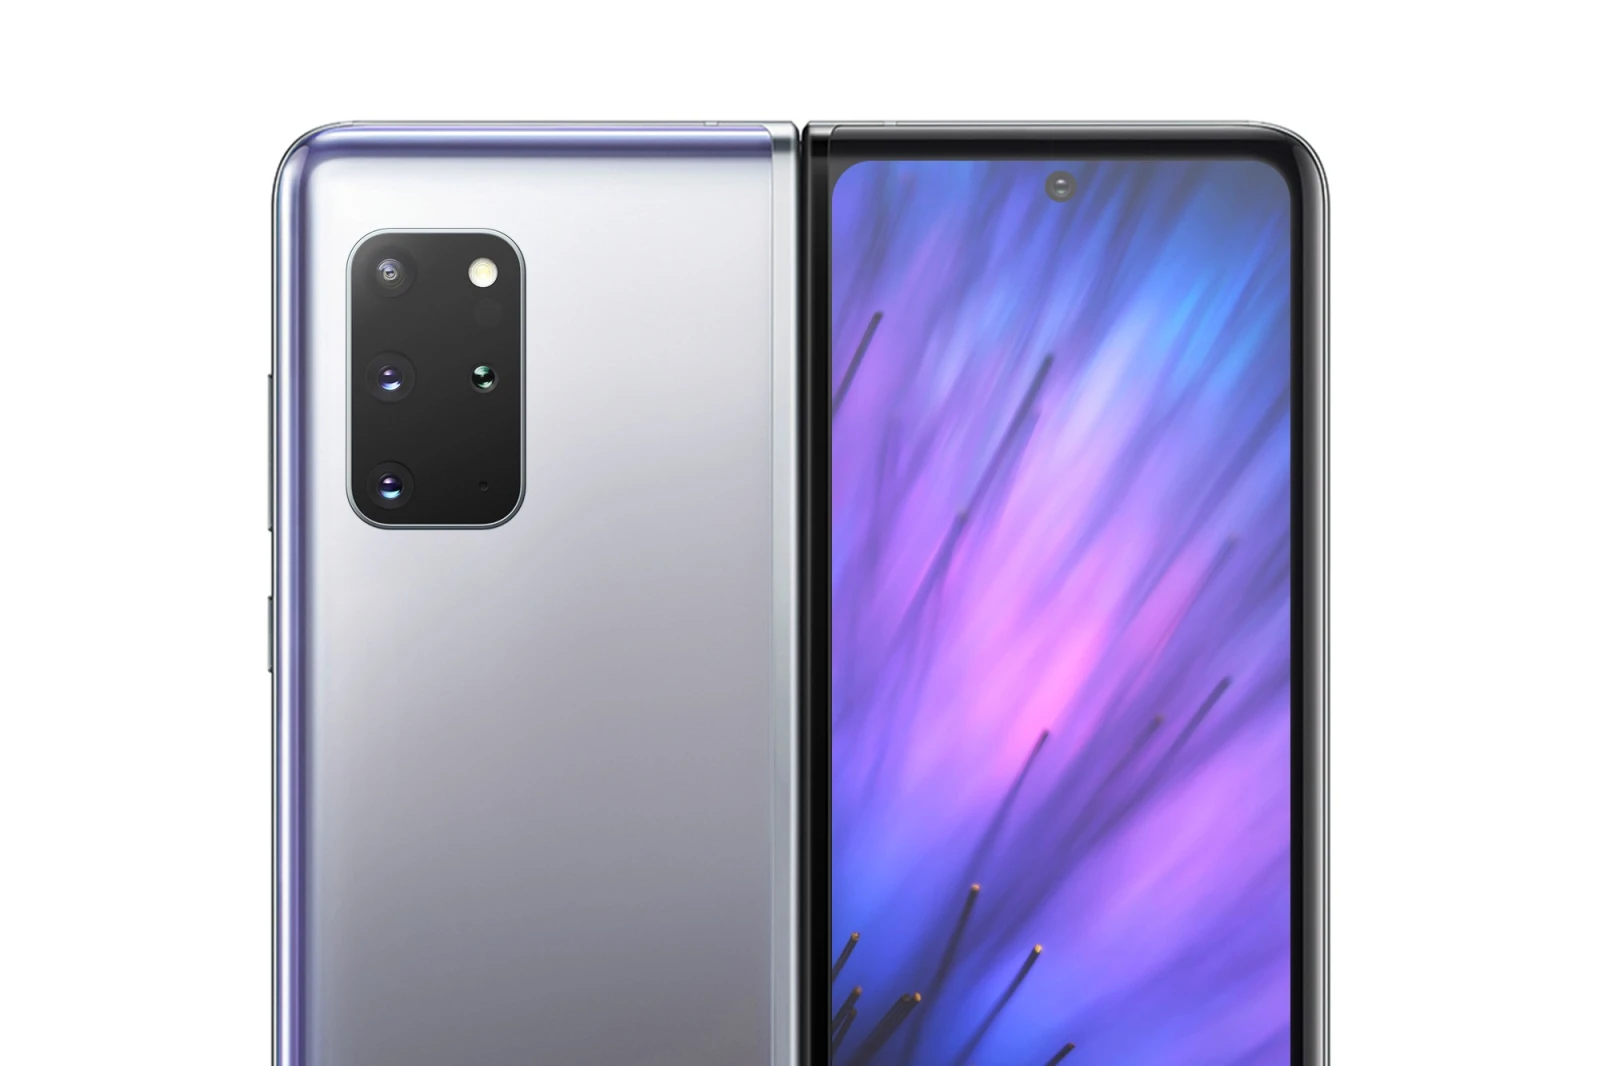 Samsung Galaxy Z Fold 2 Specification list surfaced online